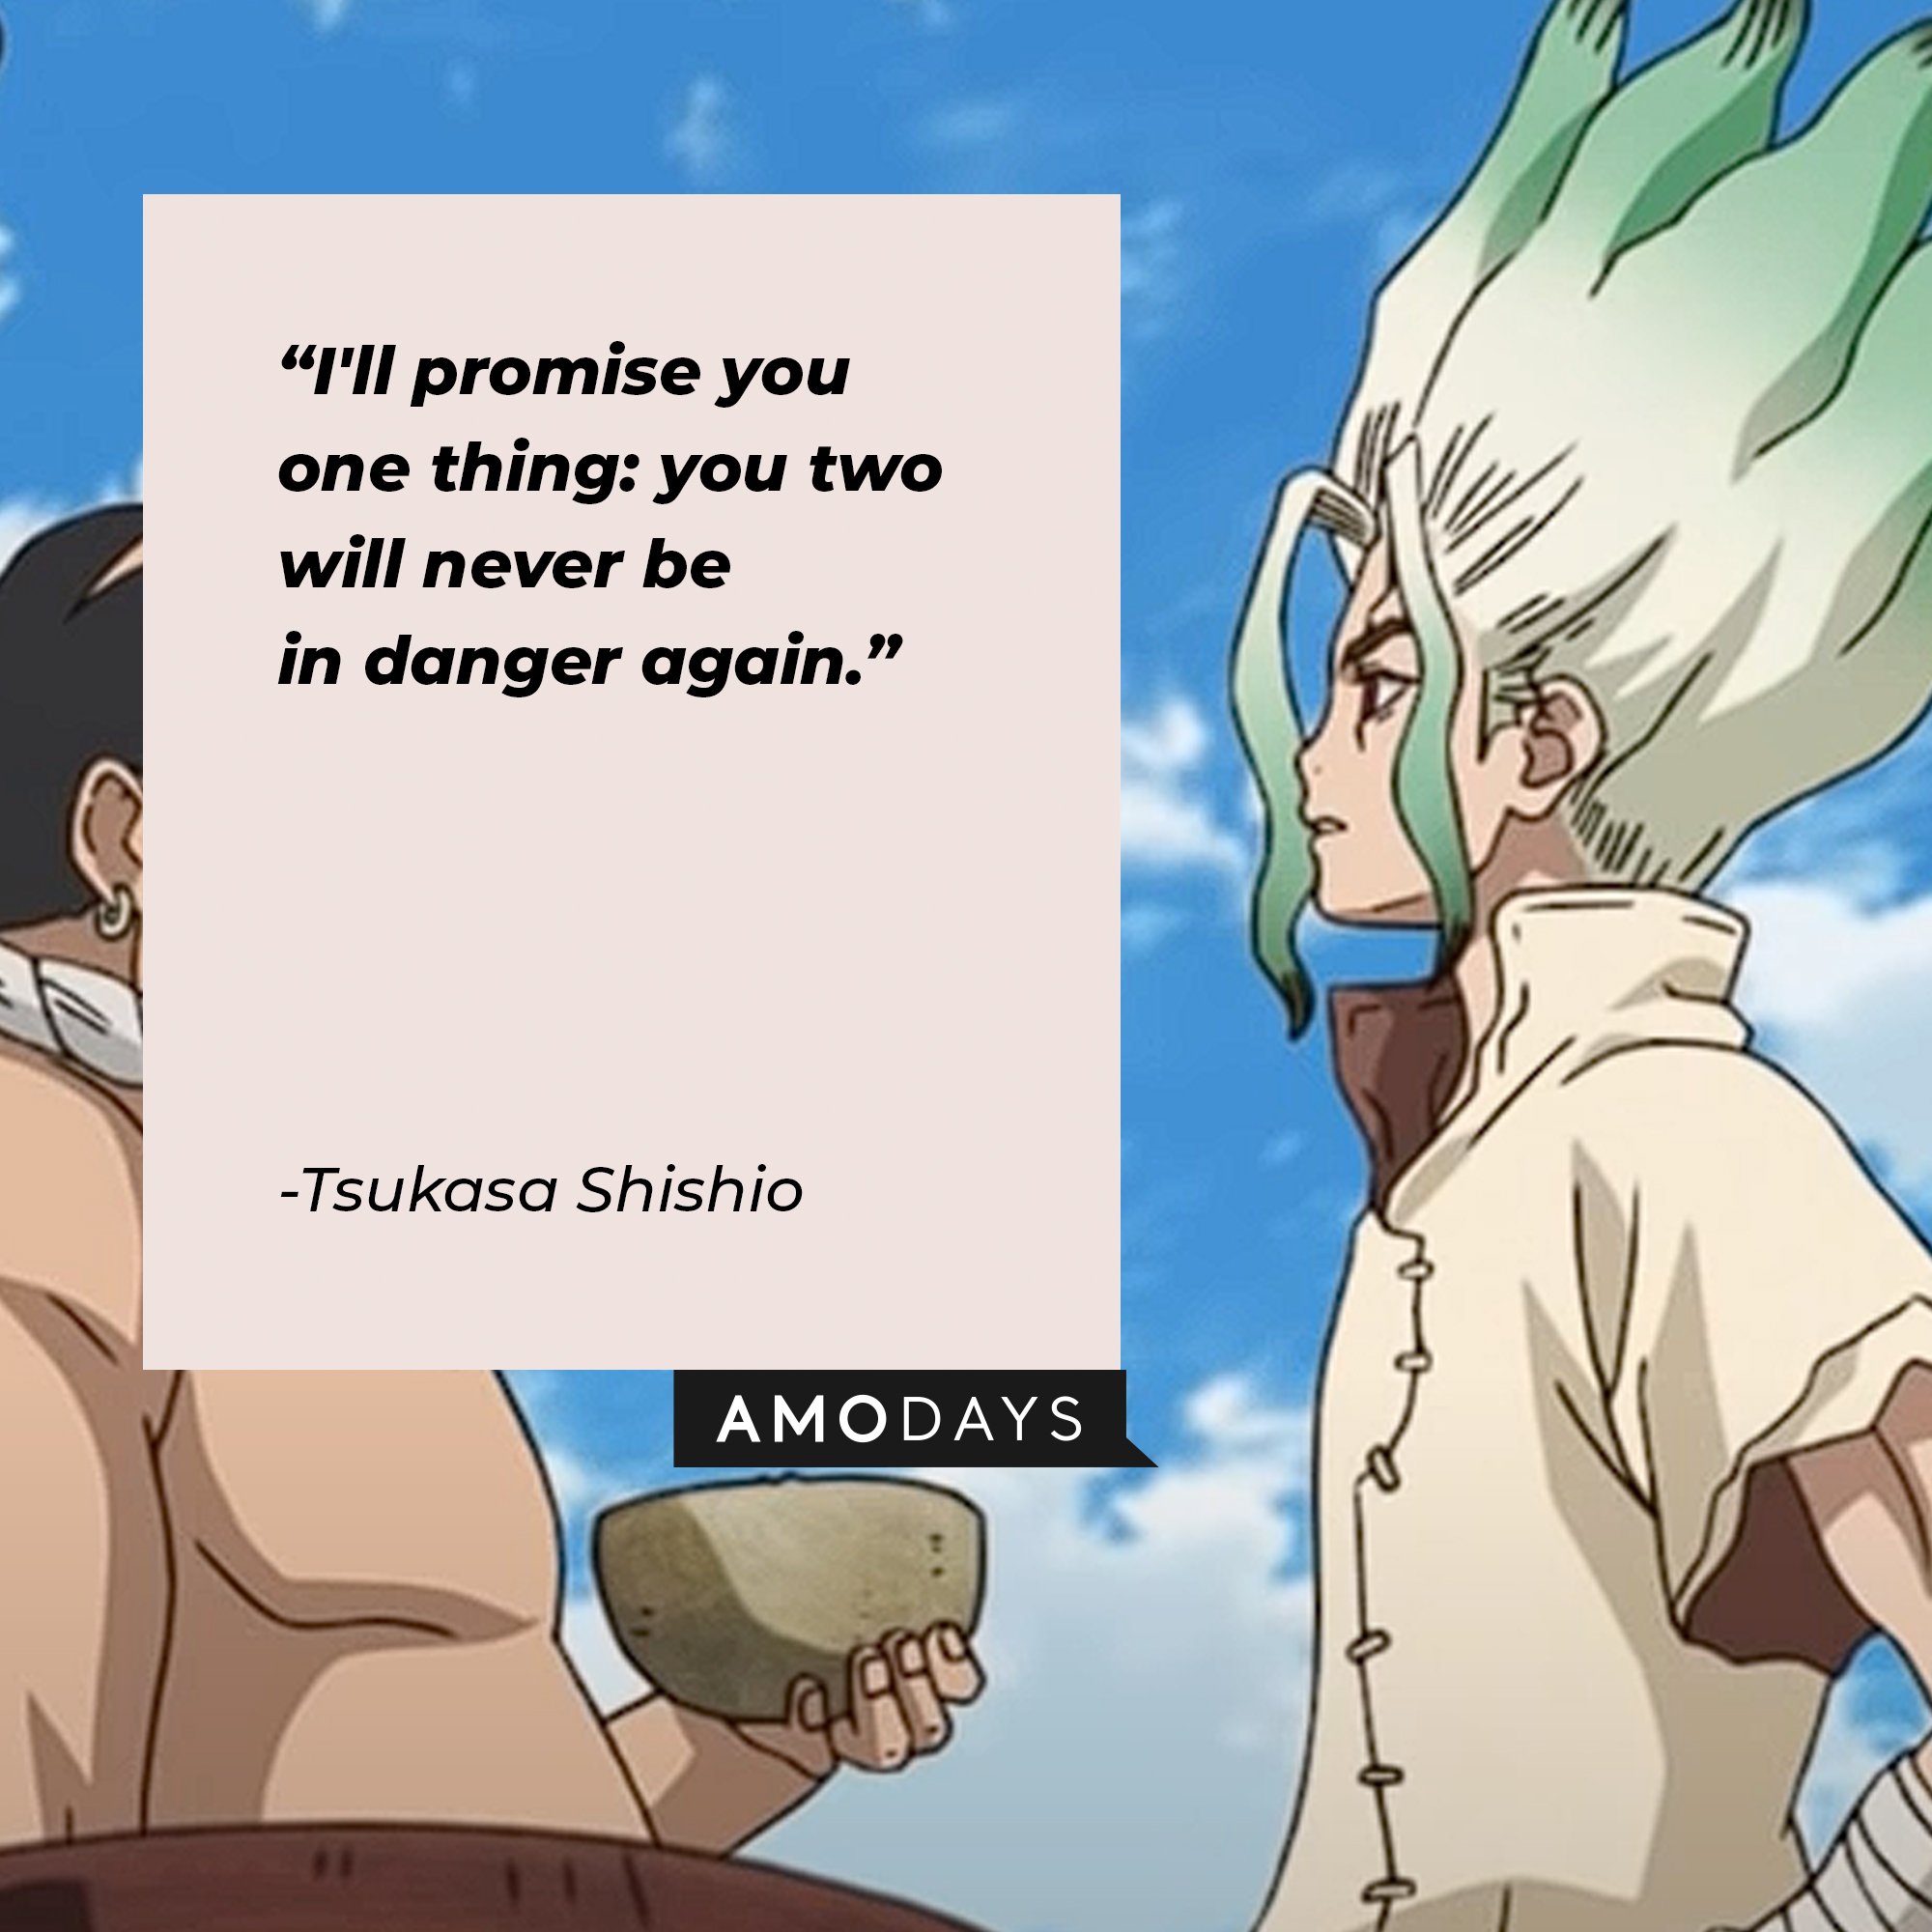 Tsukasa Shishio’s quote: "I'll promise you one thing: you two will never be in danger again." | Image: AmoDays